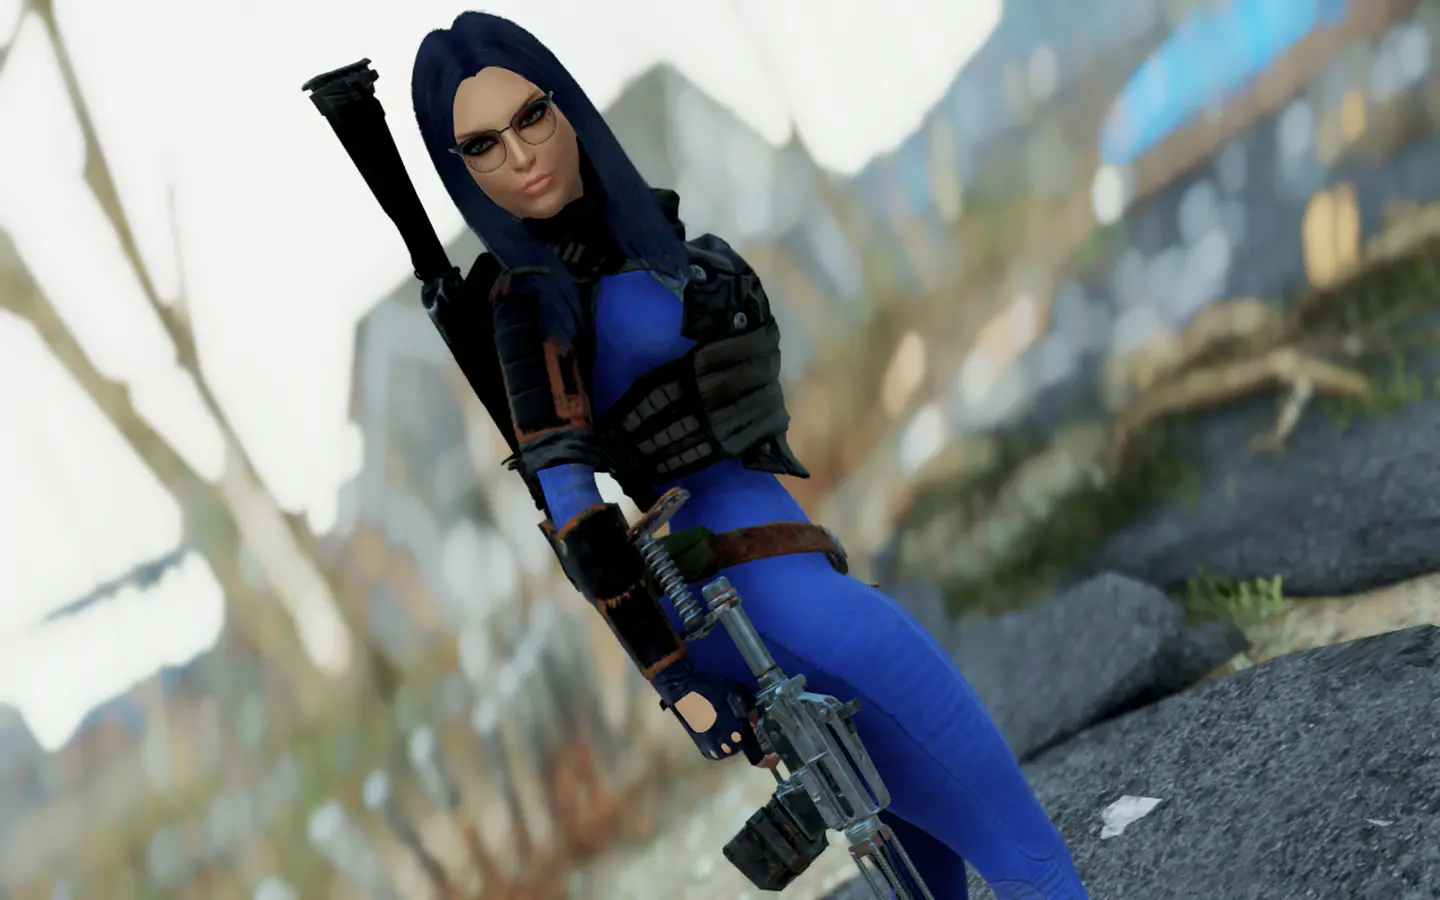 Blue Hair Mod for Fallout 4 - wide 4